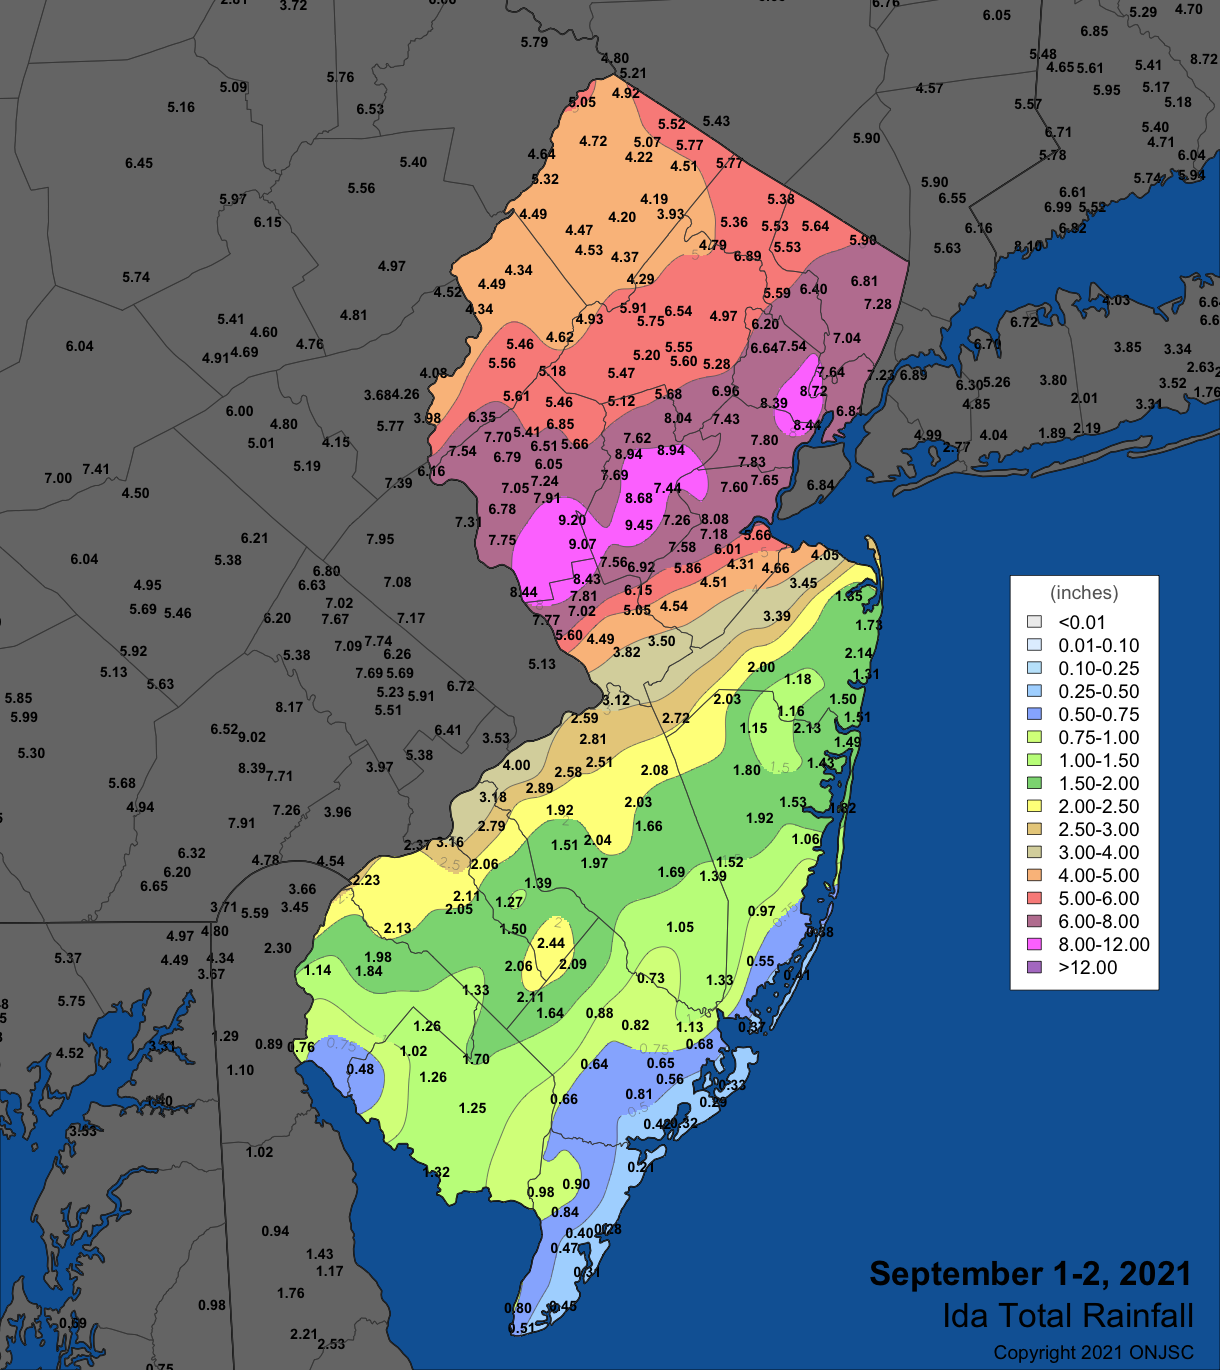 September 1st–2nd rainfall in NJ and surrounding states based on observations from Rutgers NJ Weather Network, NJ CoCoRaHS, National Weather Service Cooperative stations, and observations from several other networks. Around 370 NJ observations were used to generate the map. Not all observations that went into the colored contouring in NJ are shown to avoid overlapping values.